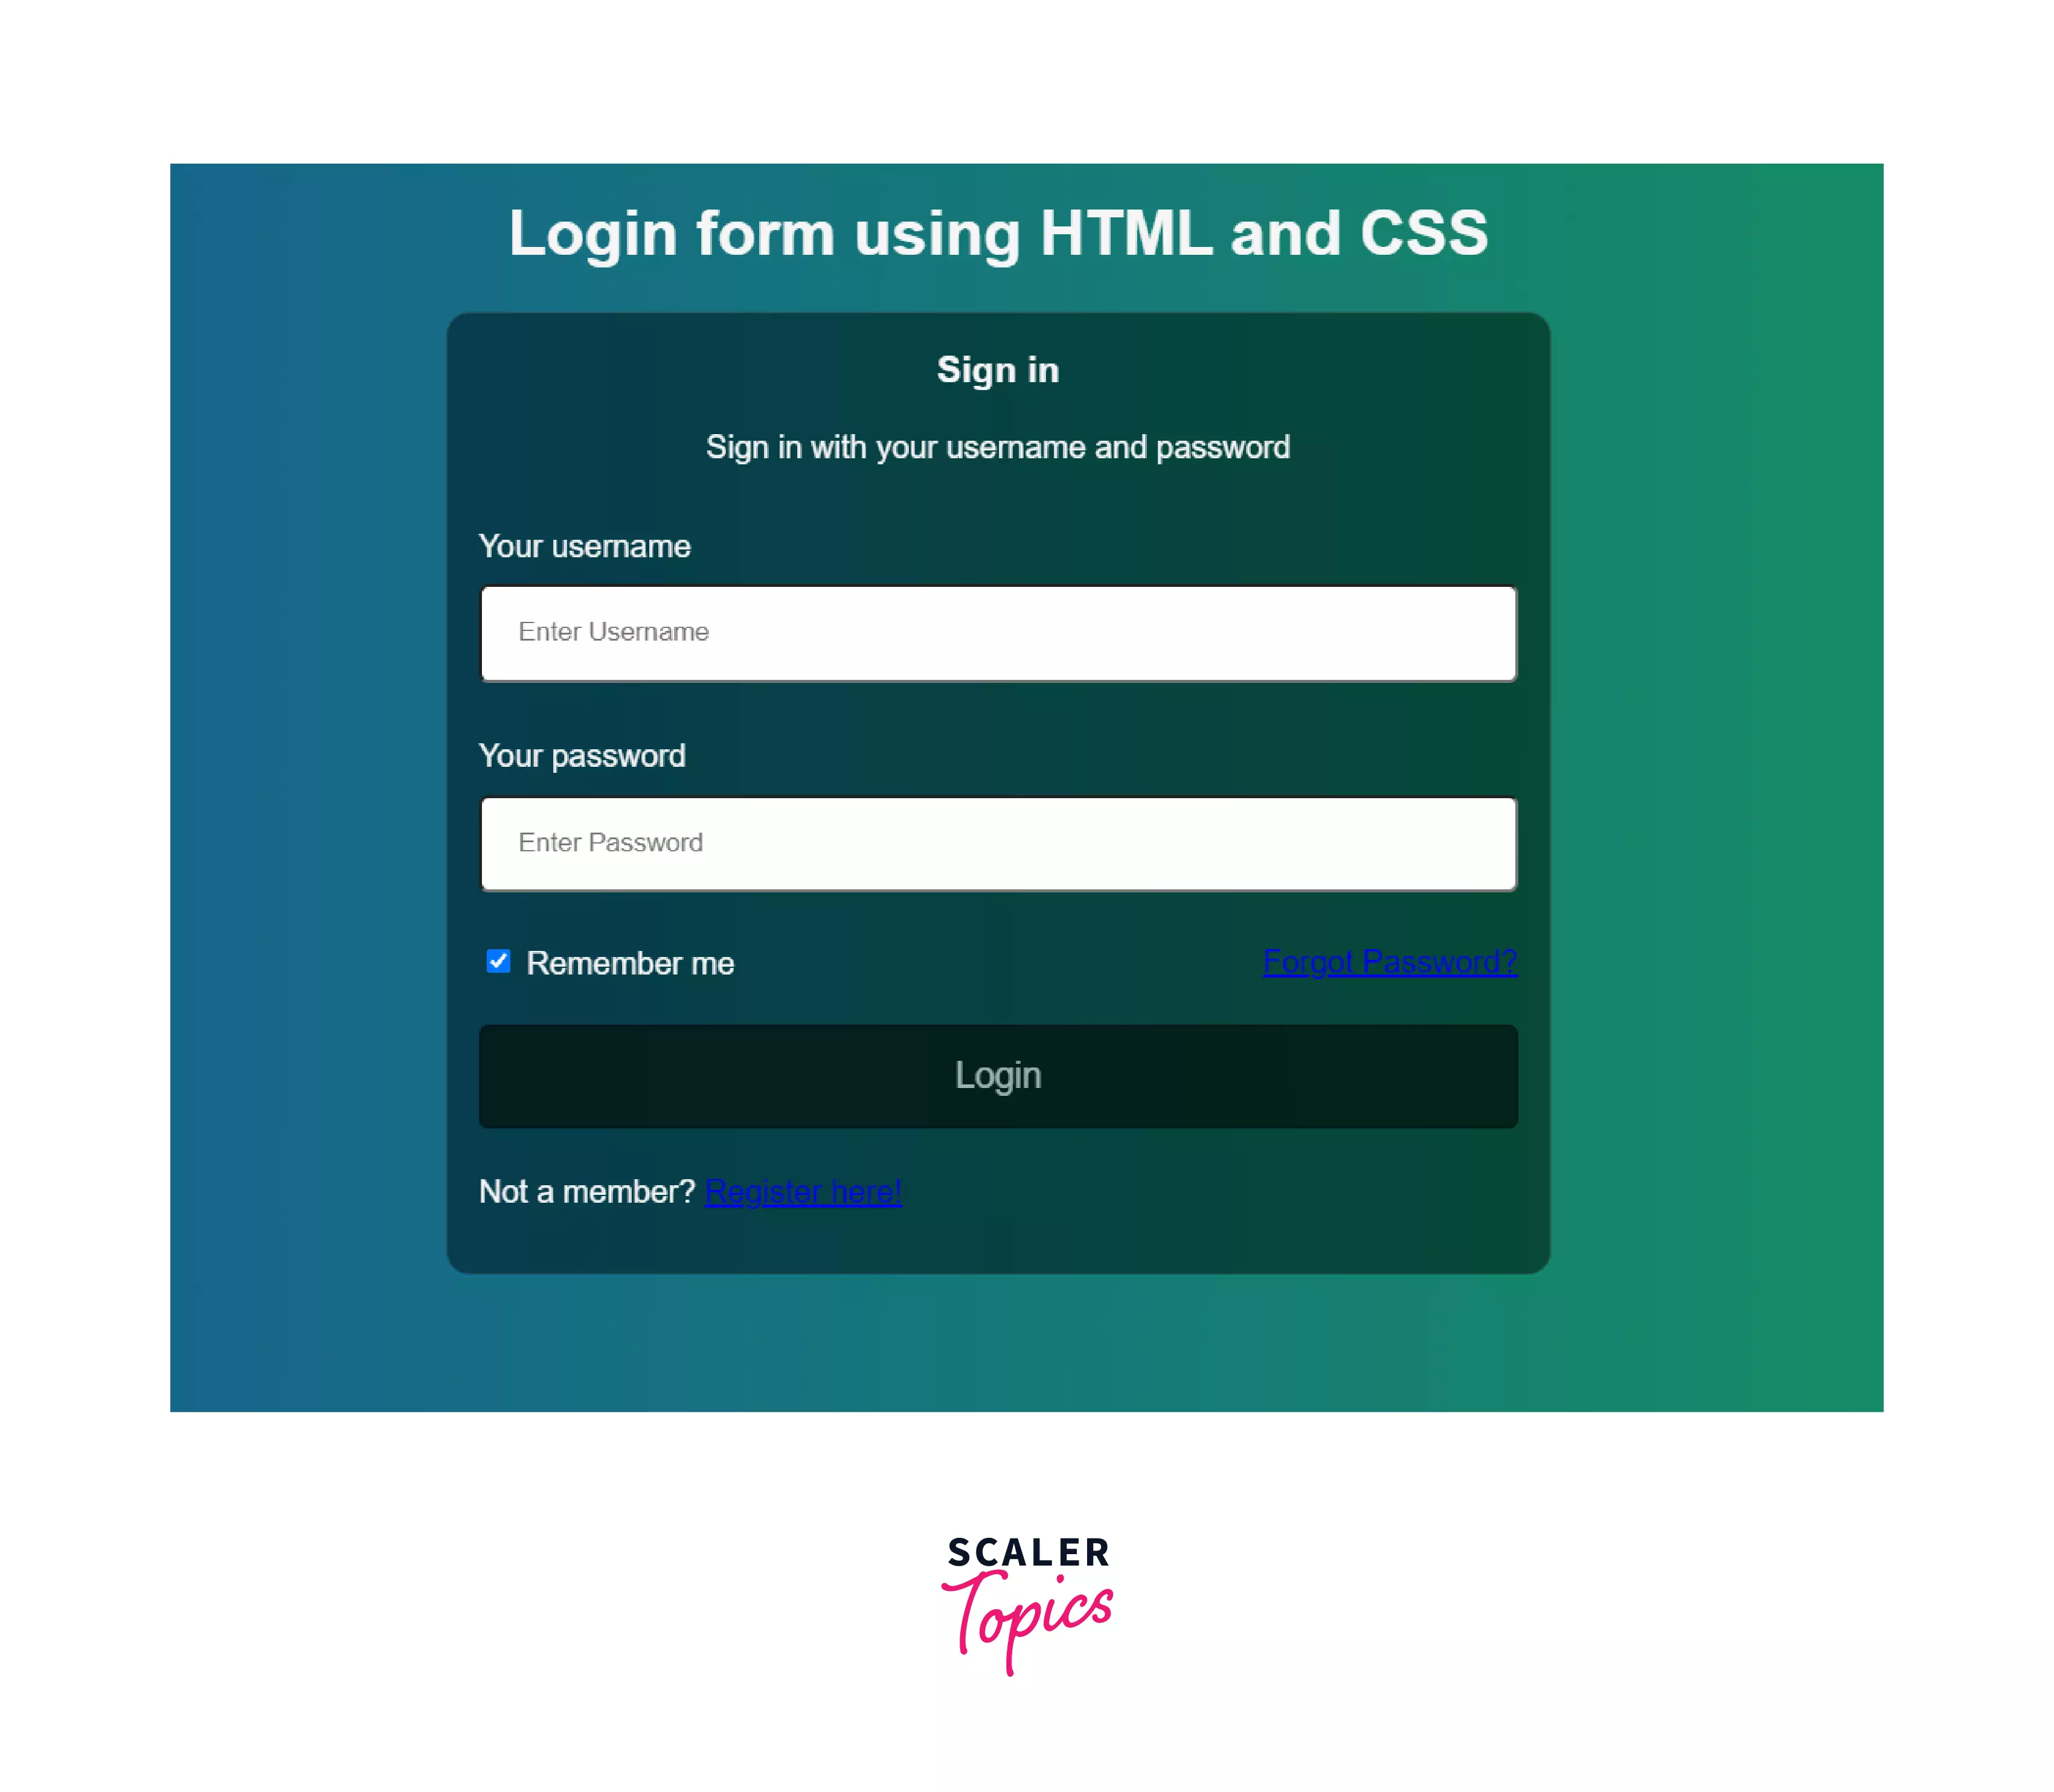 another style of the login page with CSS